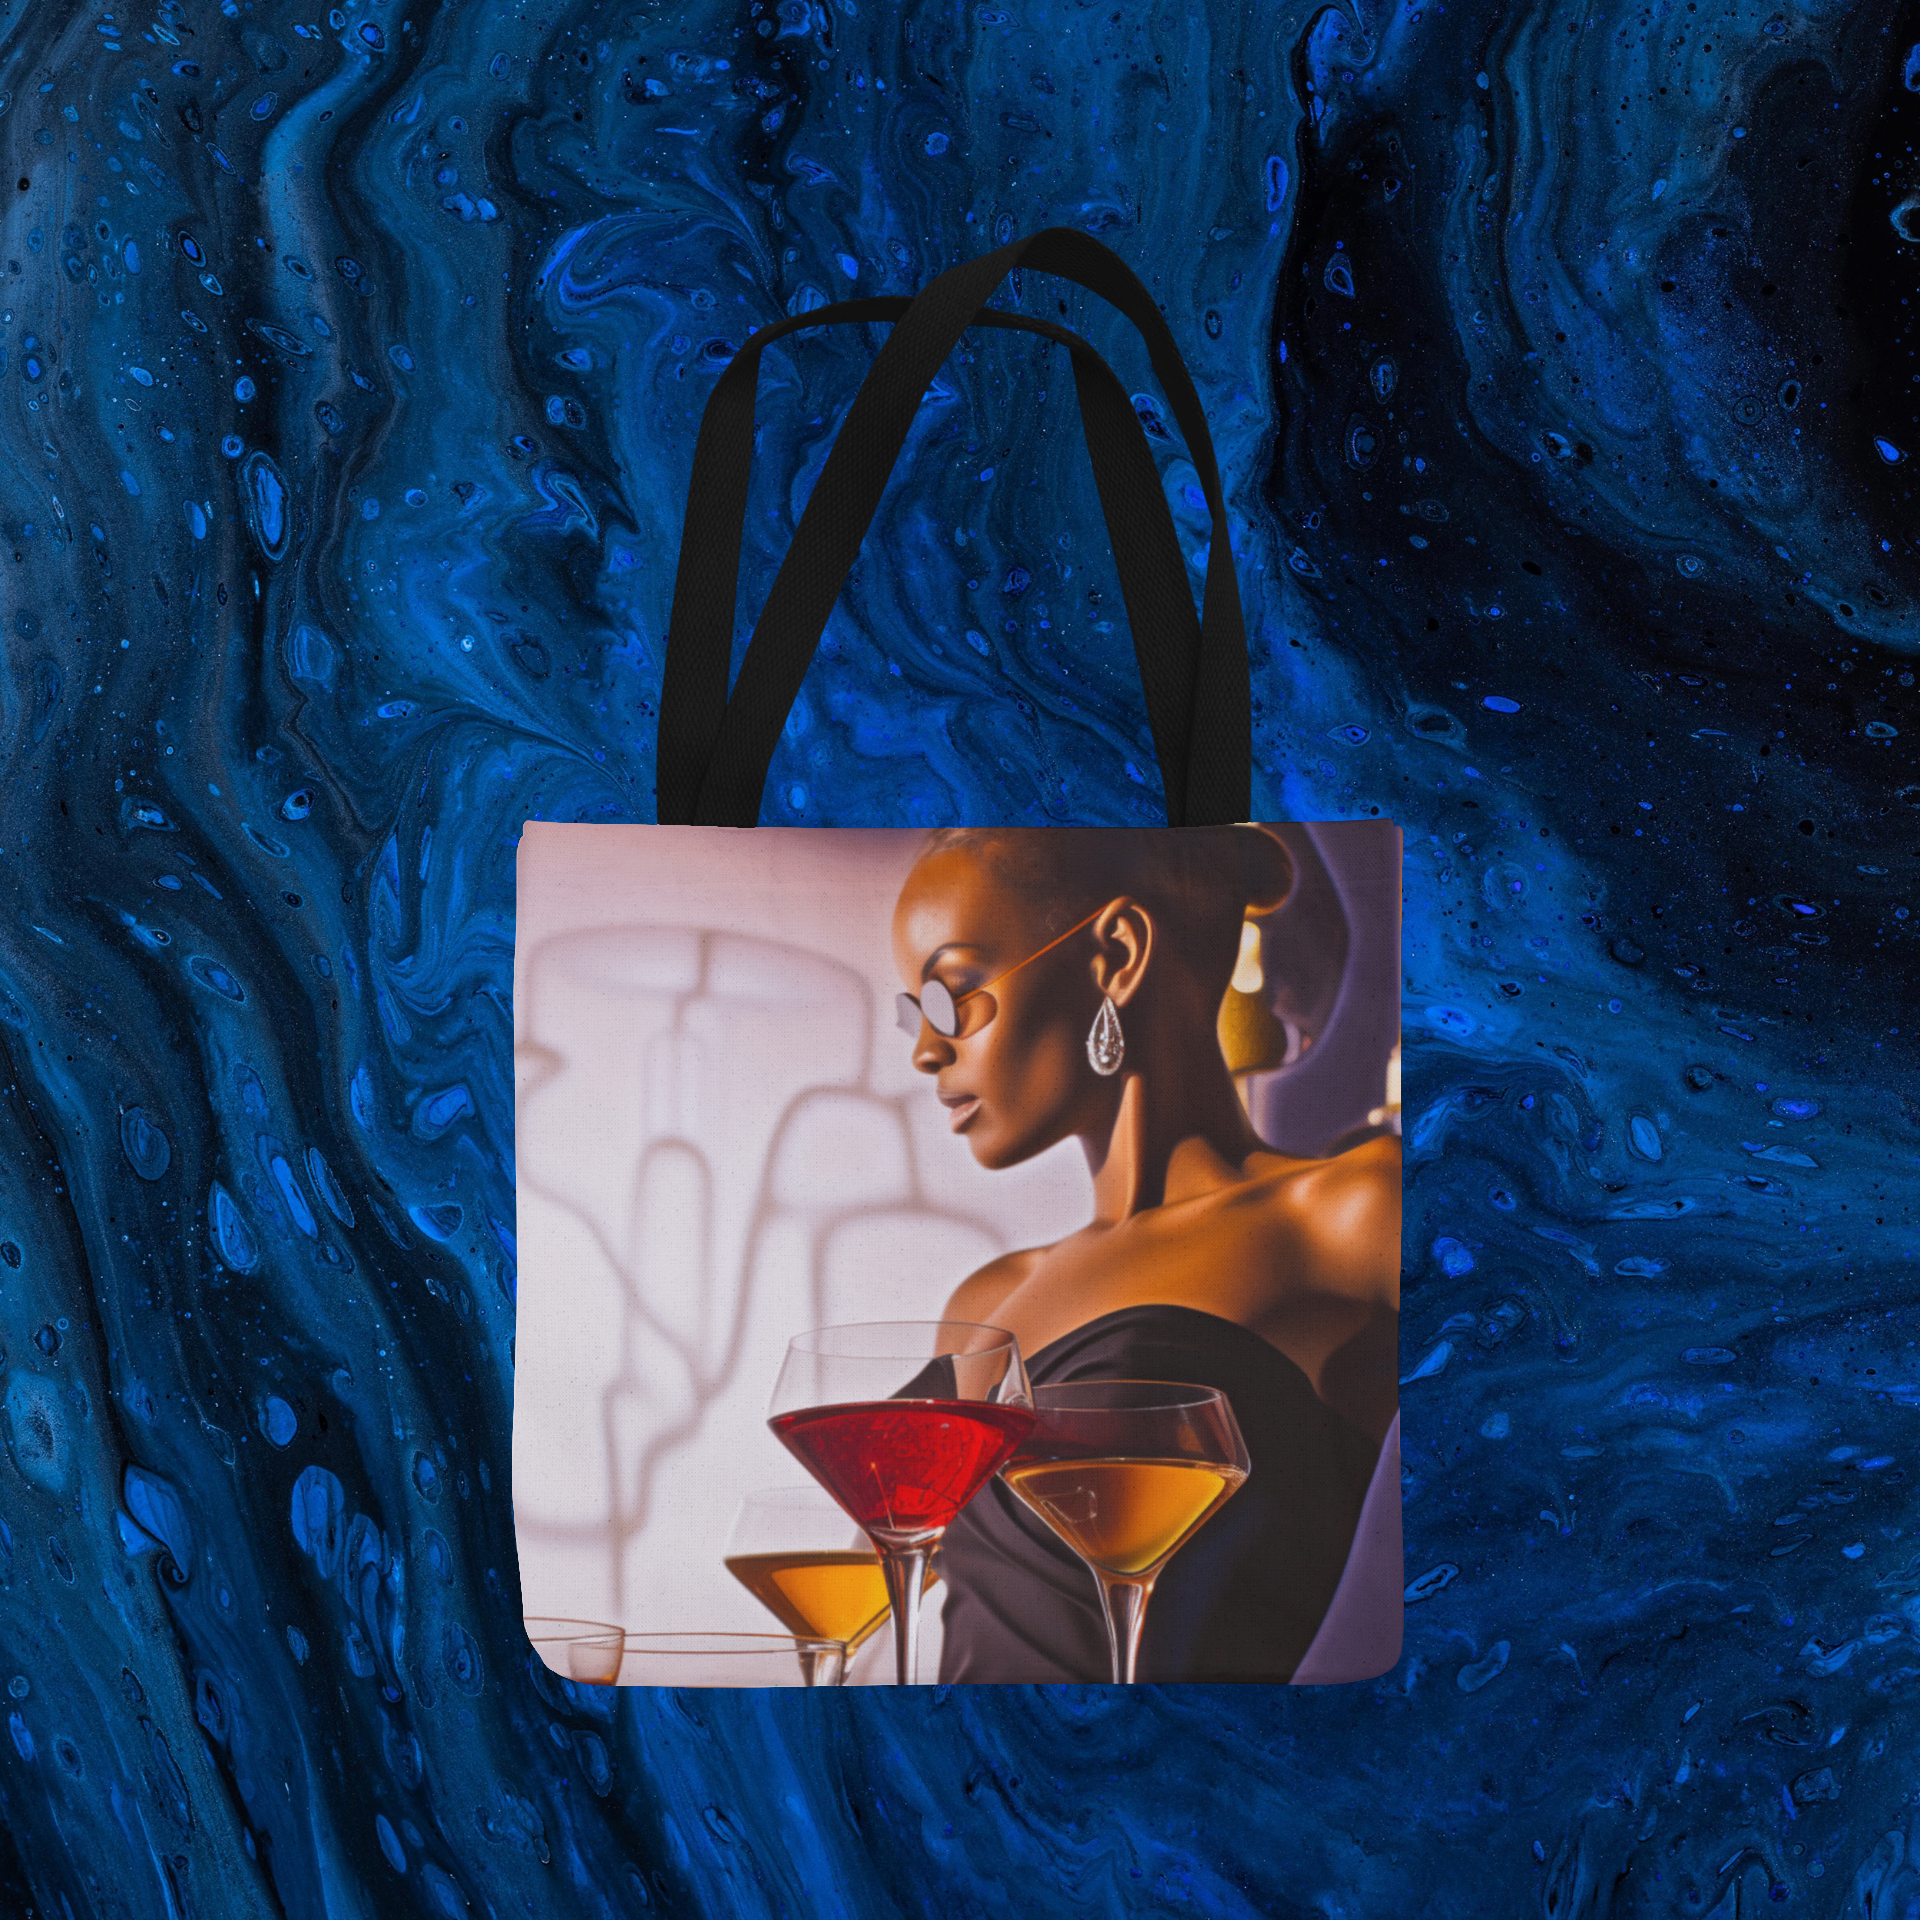 "COCKTAILS" - AFRICAN AMERICAN THEMED Tote Bag